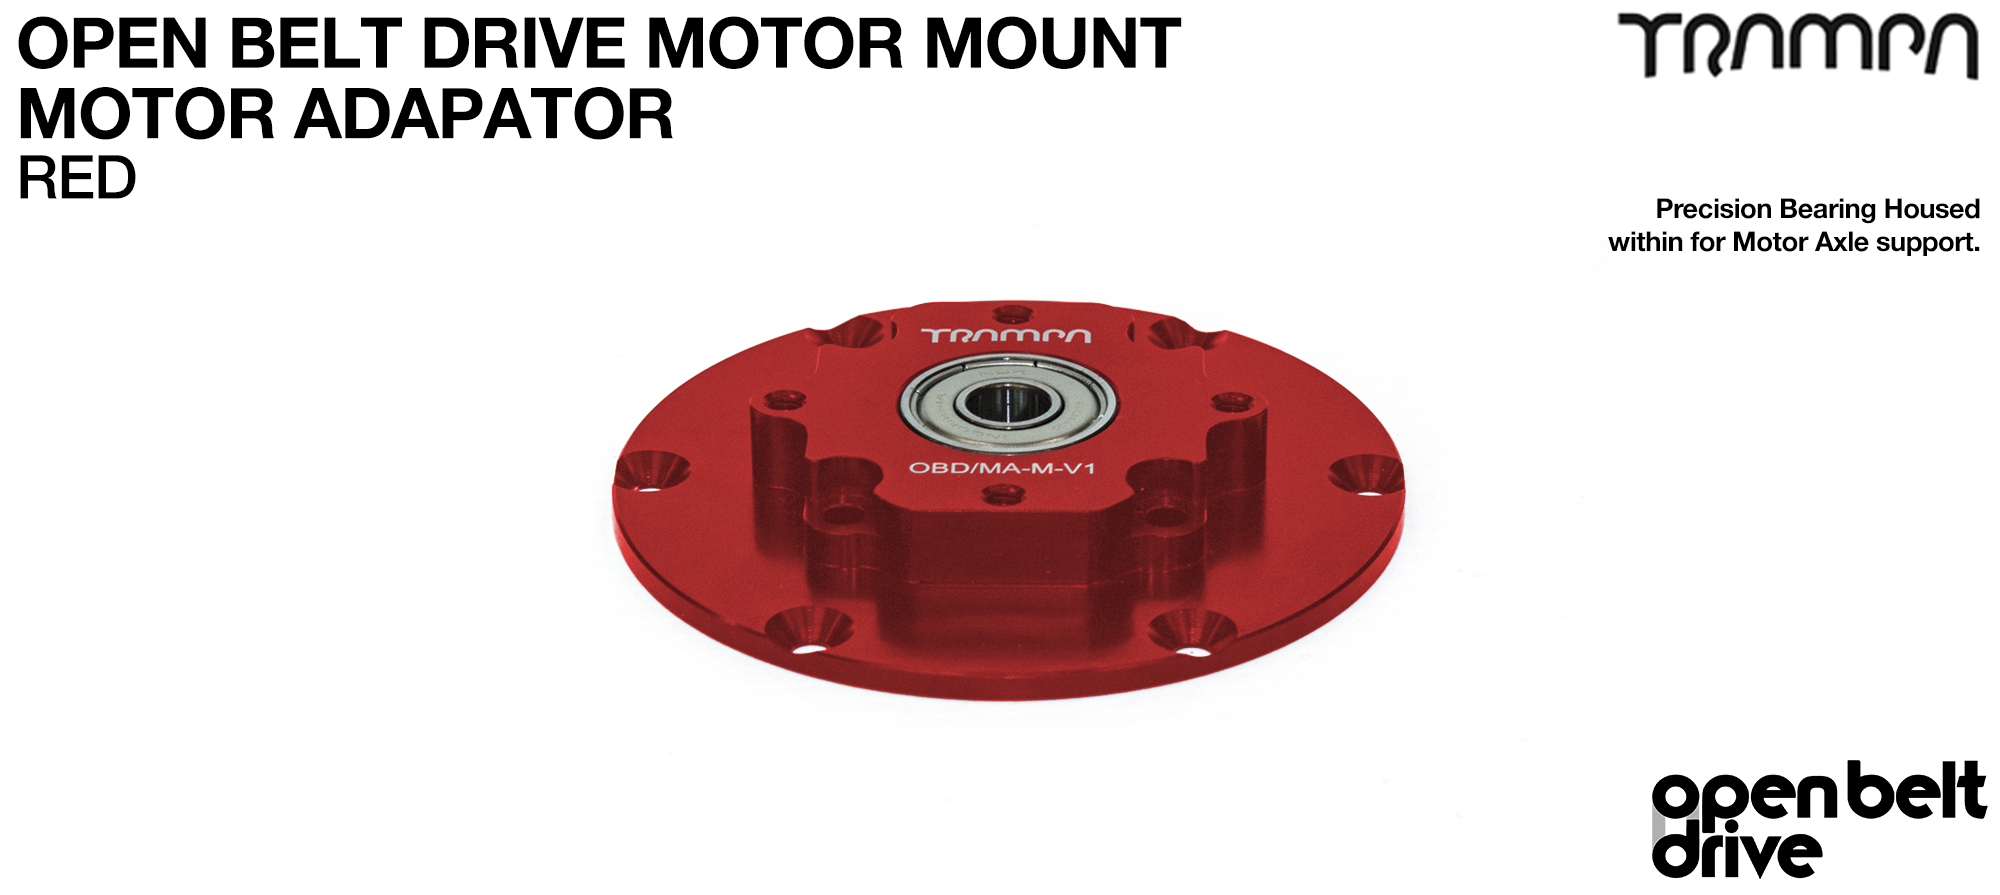 OBD Motor Adaptor with Housed Bearing - RED